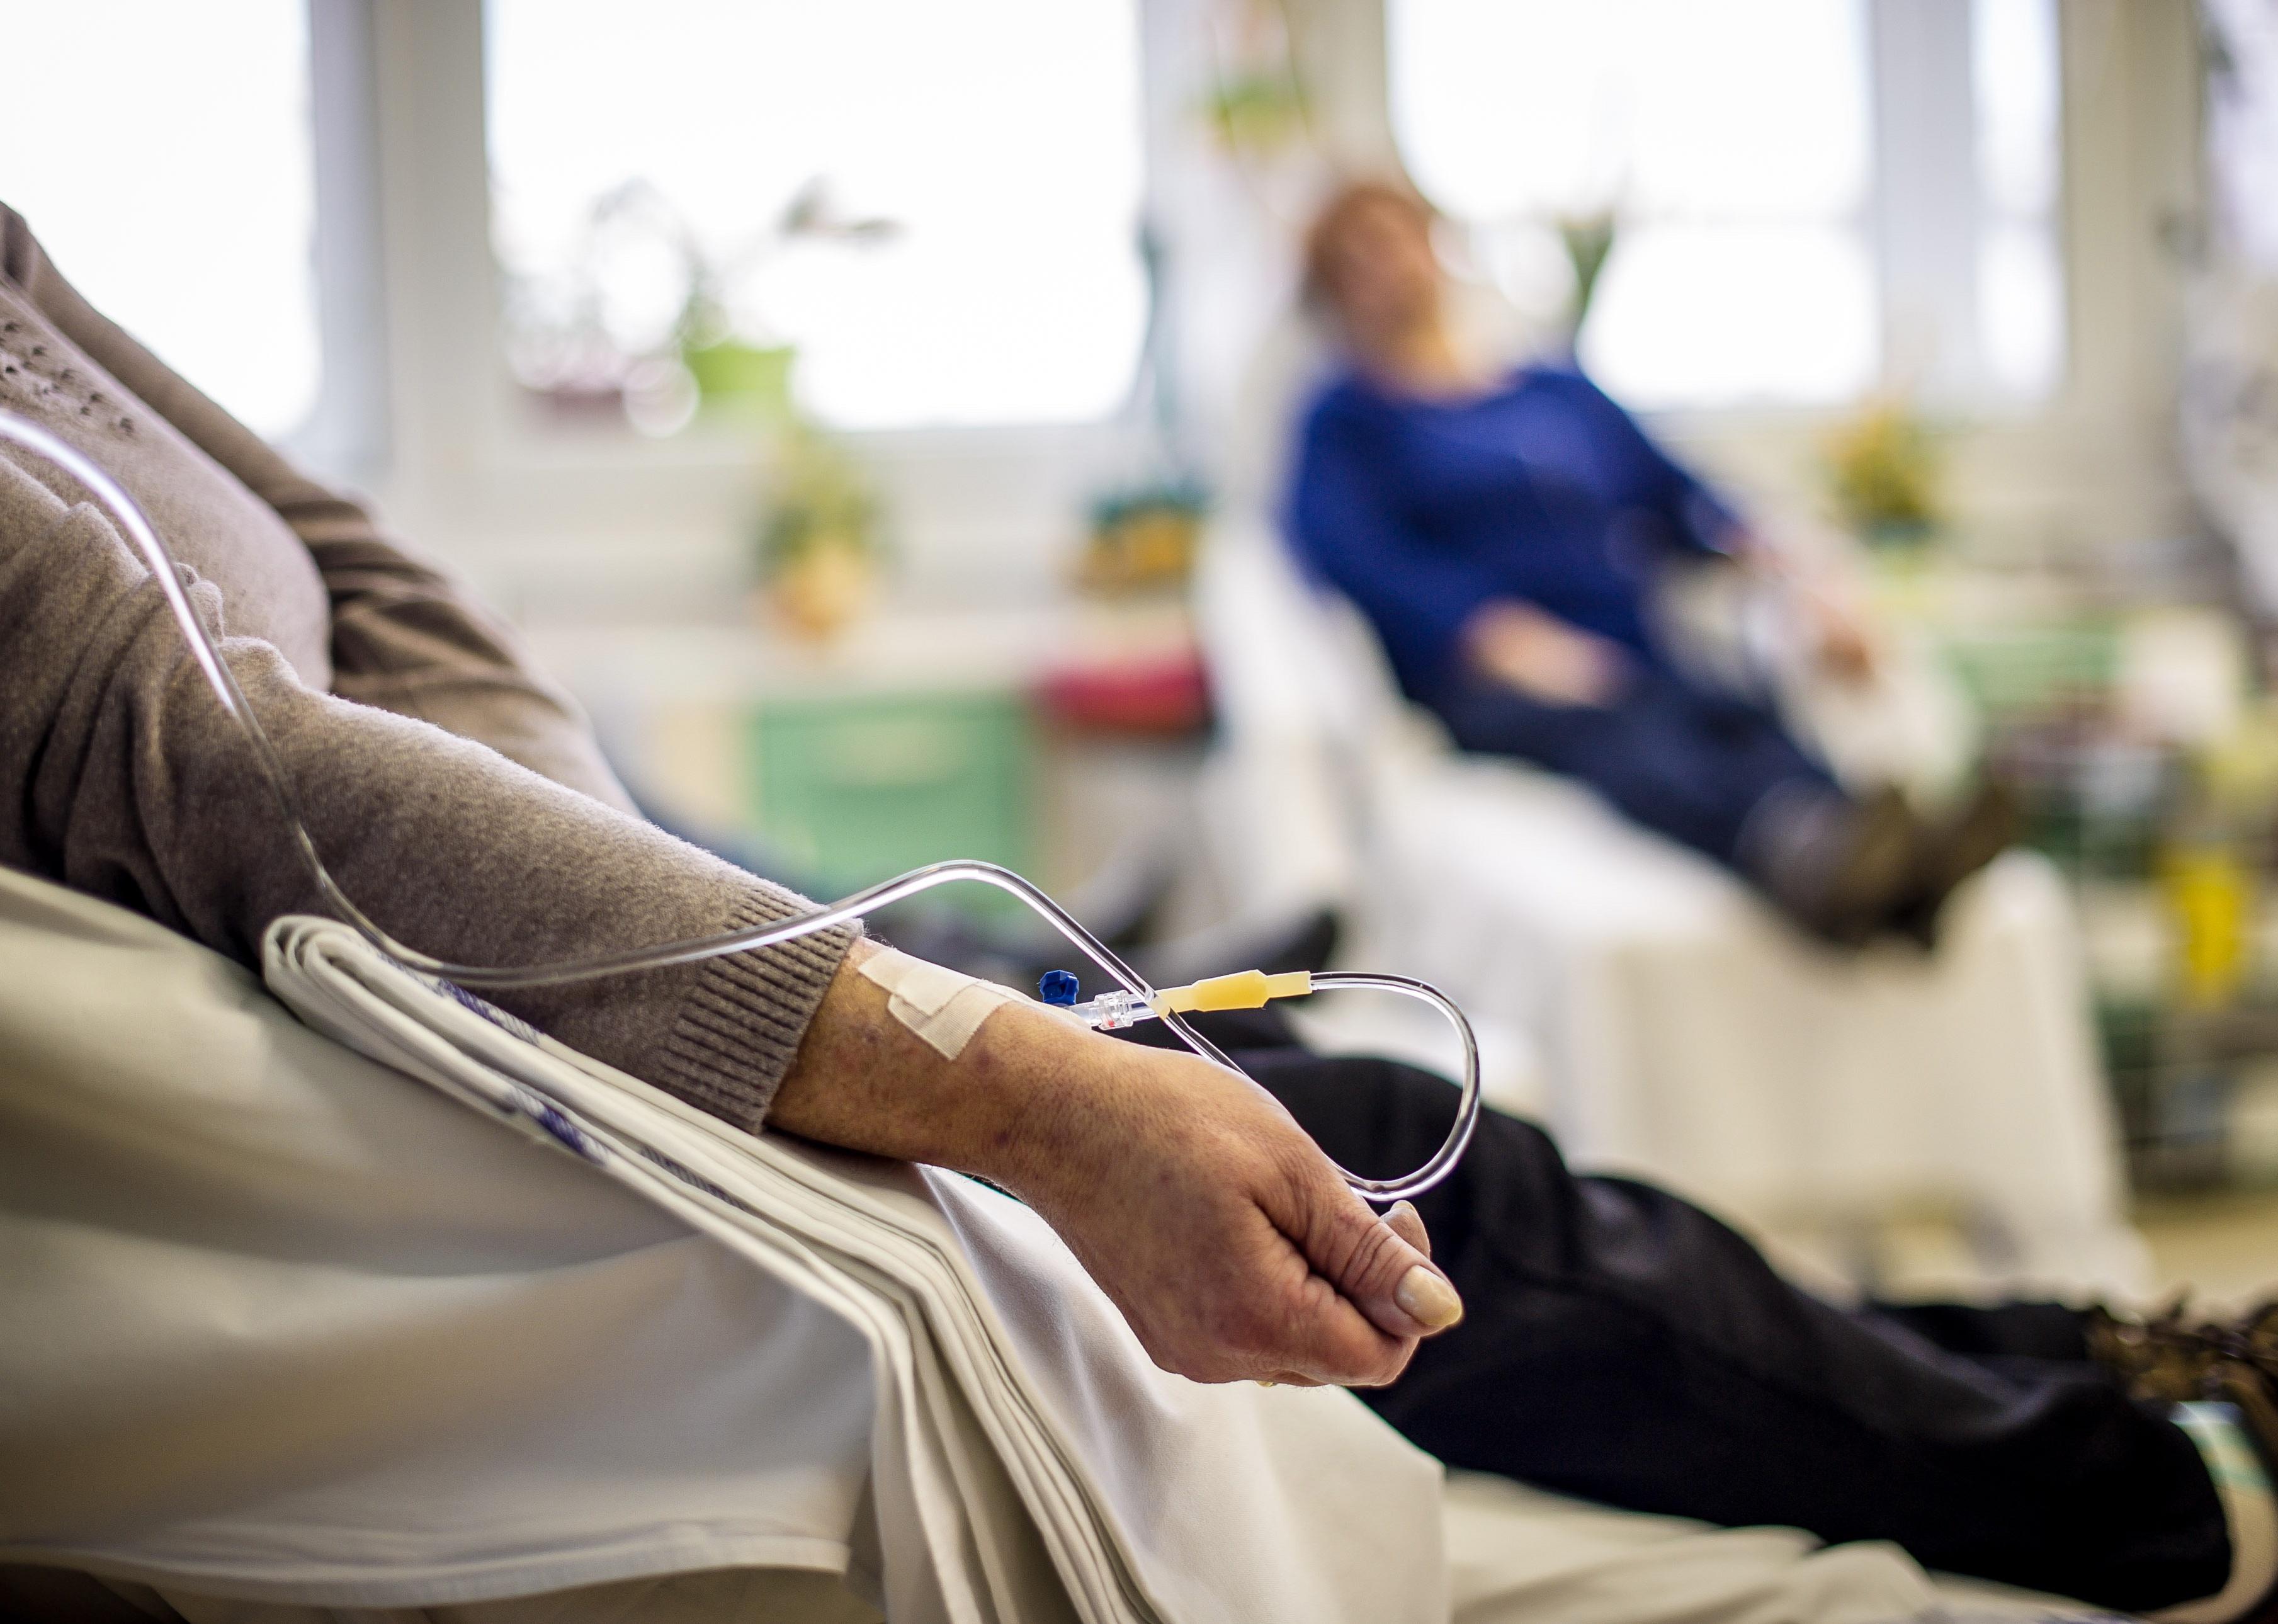 Cancer patients receiving chemotherapy treatment in a hospital.